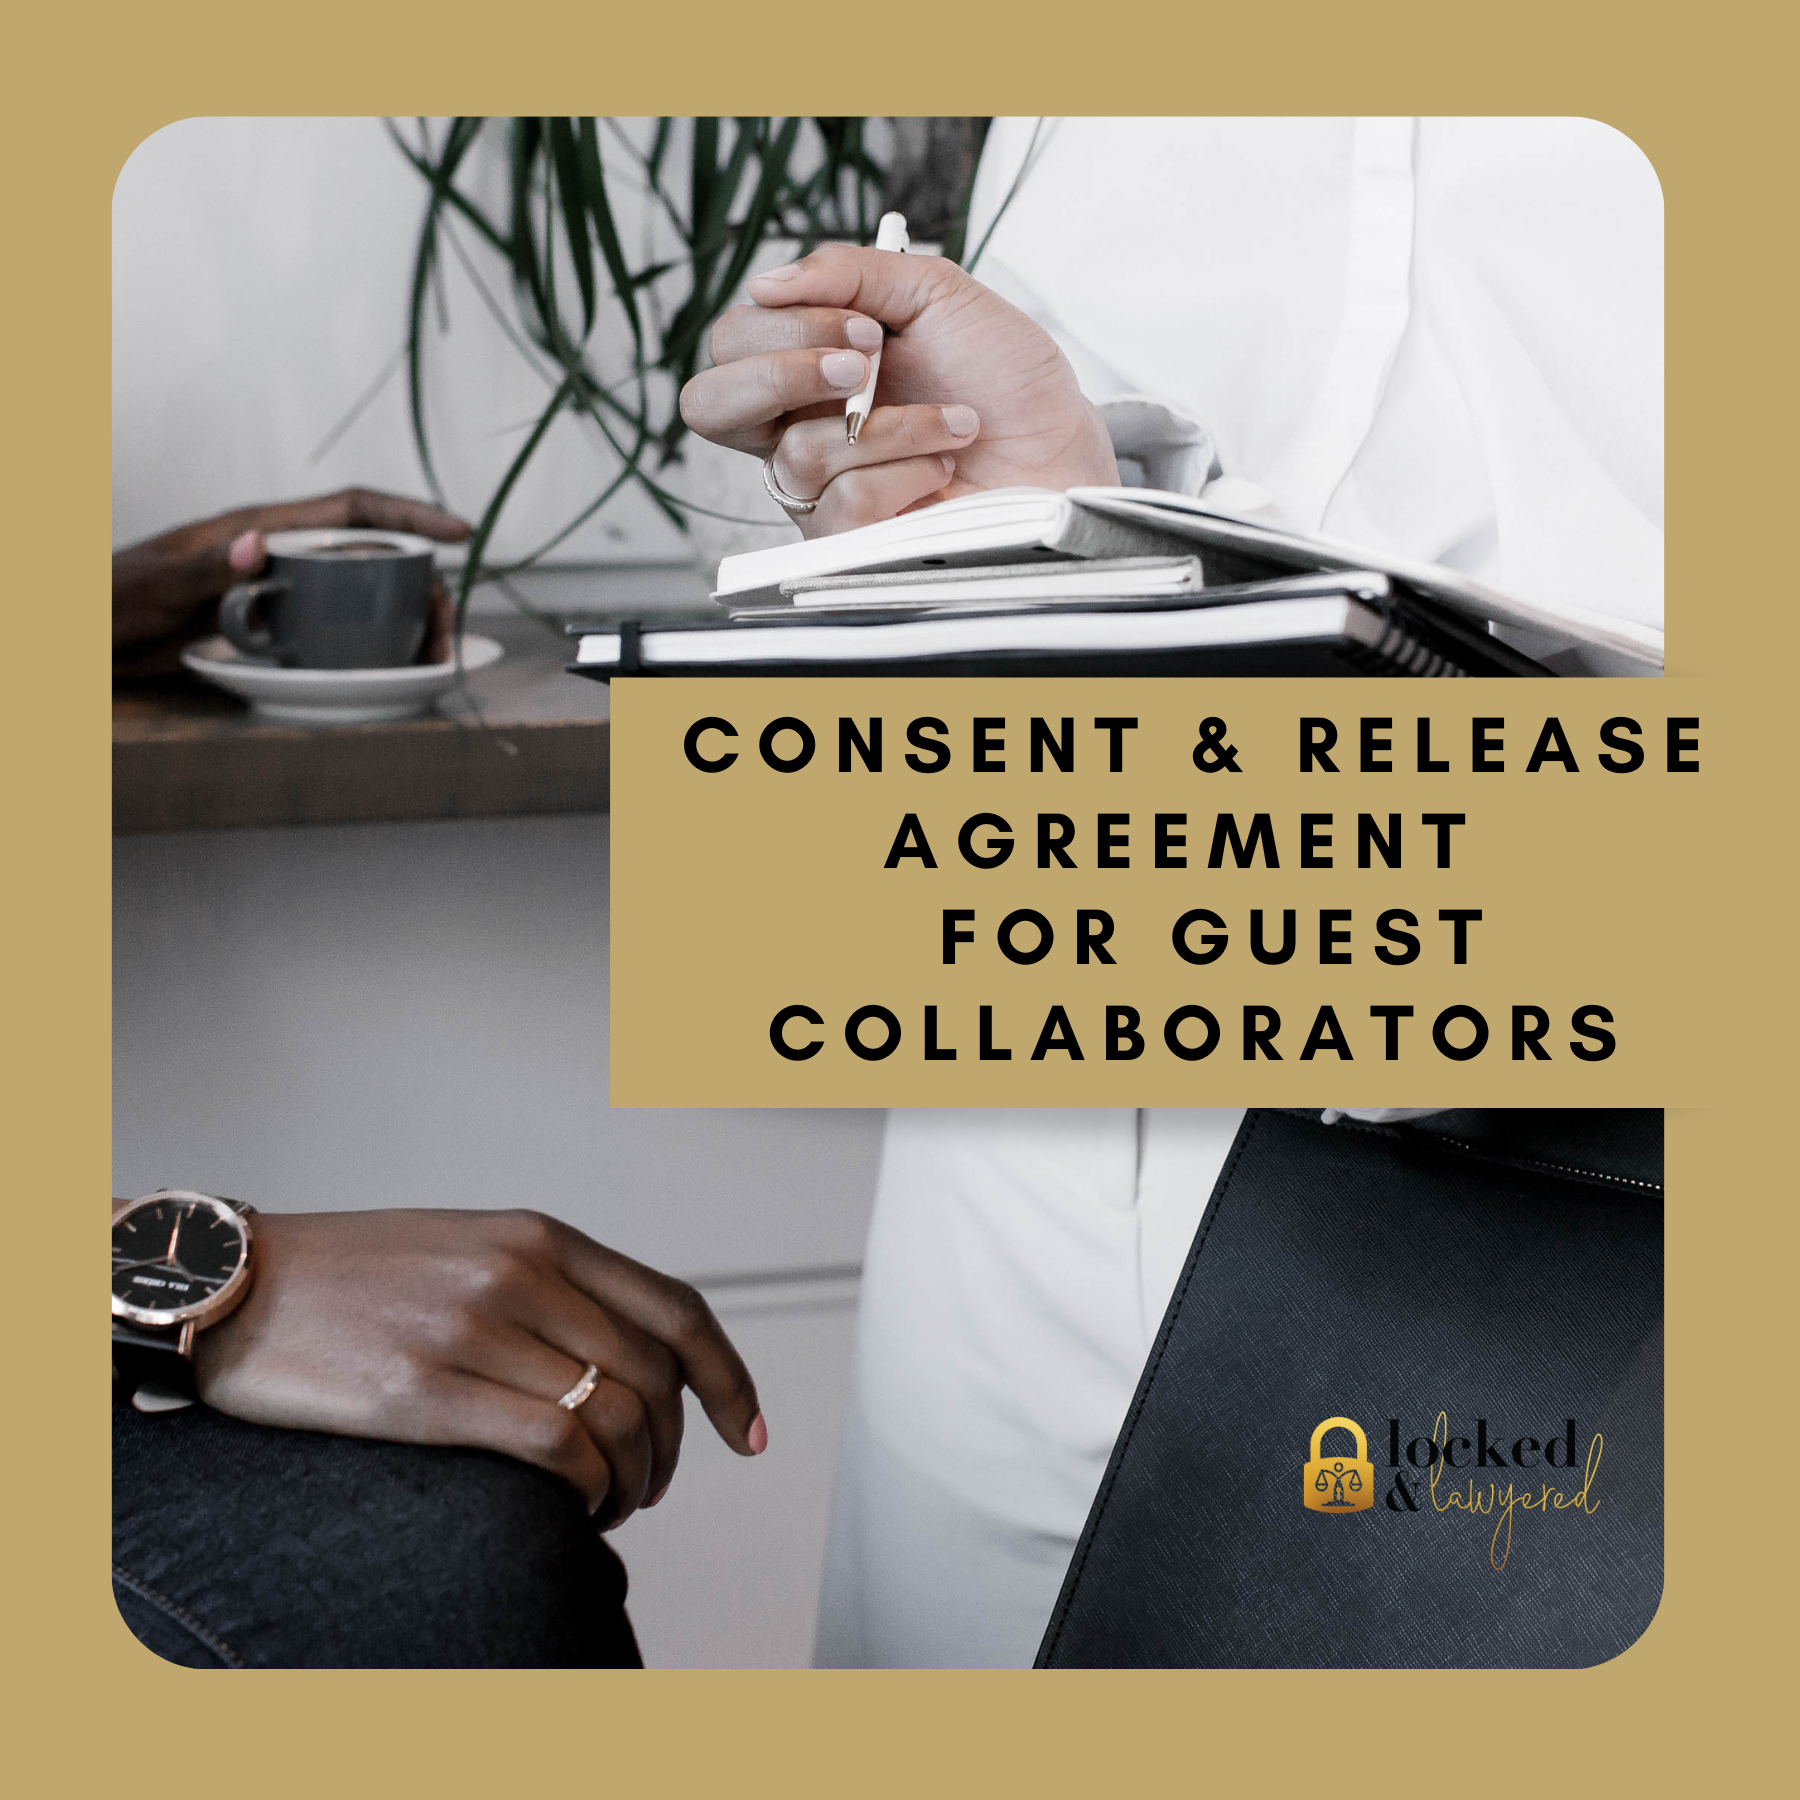 Consent & Release for Guest Collaborators